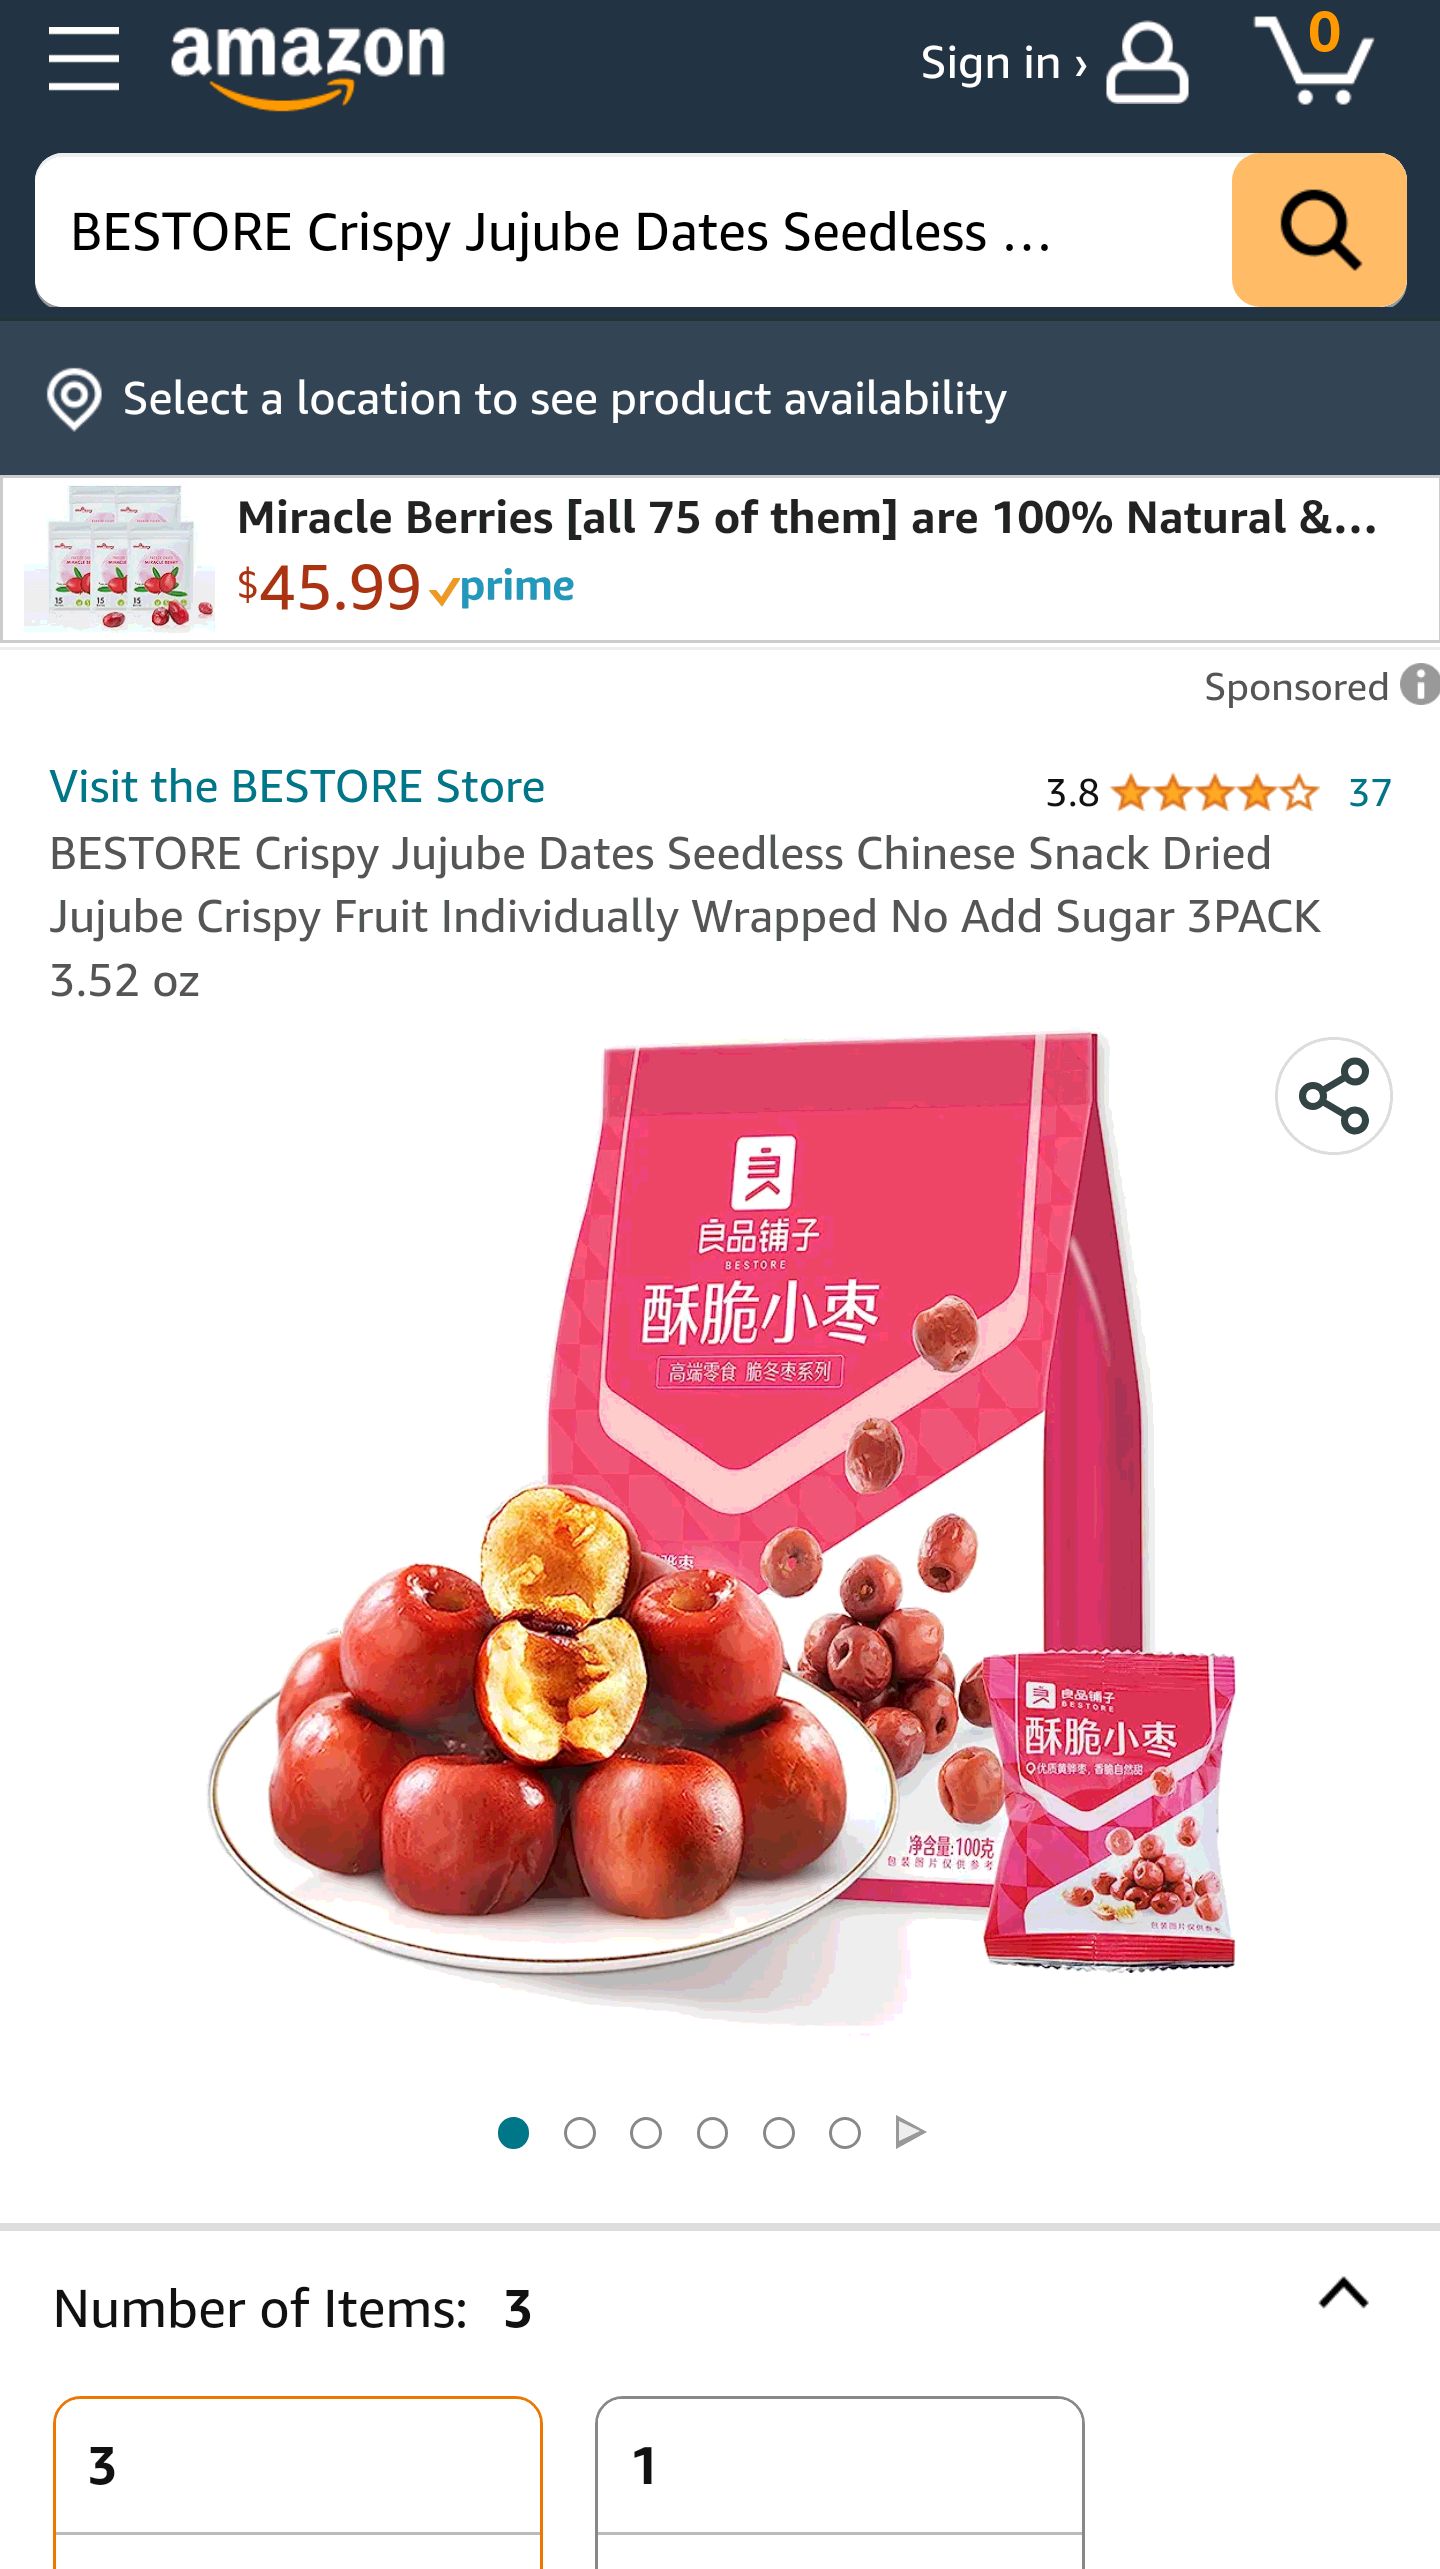 BESTORE Crispy Jujube Dates Seedless Chinese Snack Dried Jujube Crispy Fruit Individually Wrapped No Add Sugar 3PACK 3.52 oz : Grocery & Gourmet Food